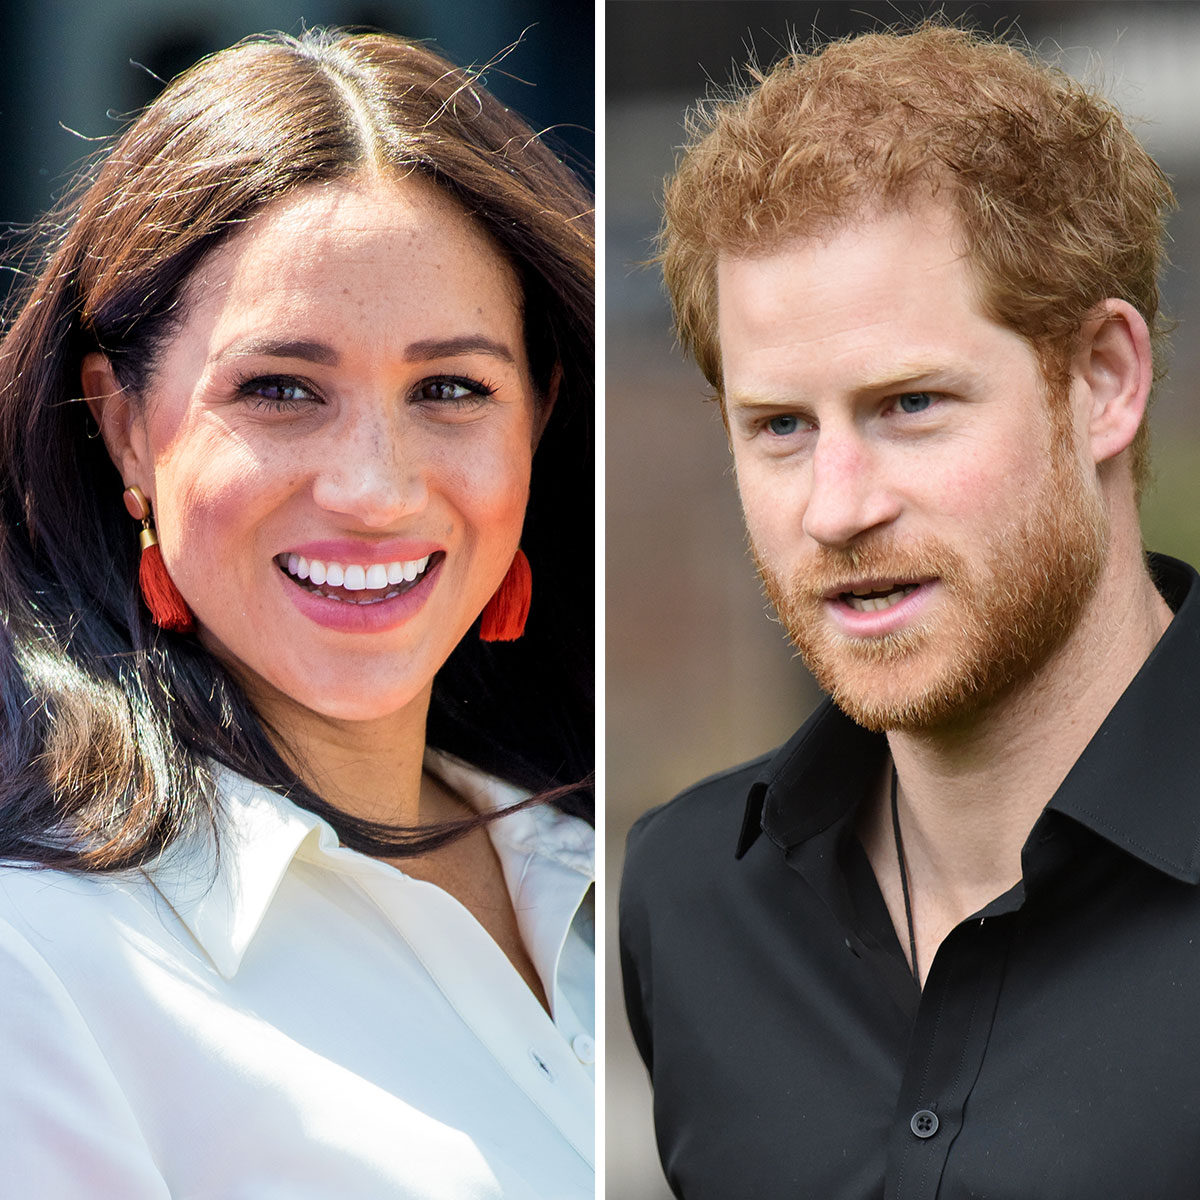 meghan markle white shirt prince harry black collared shirt diptych side-by-side